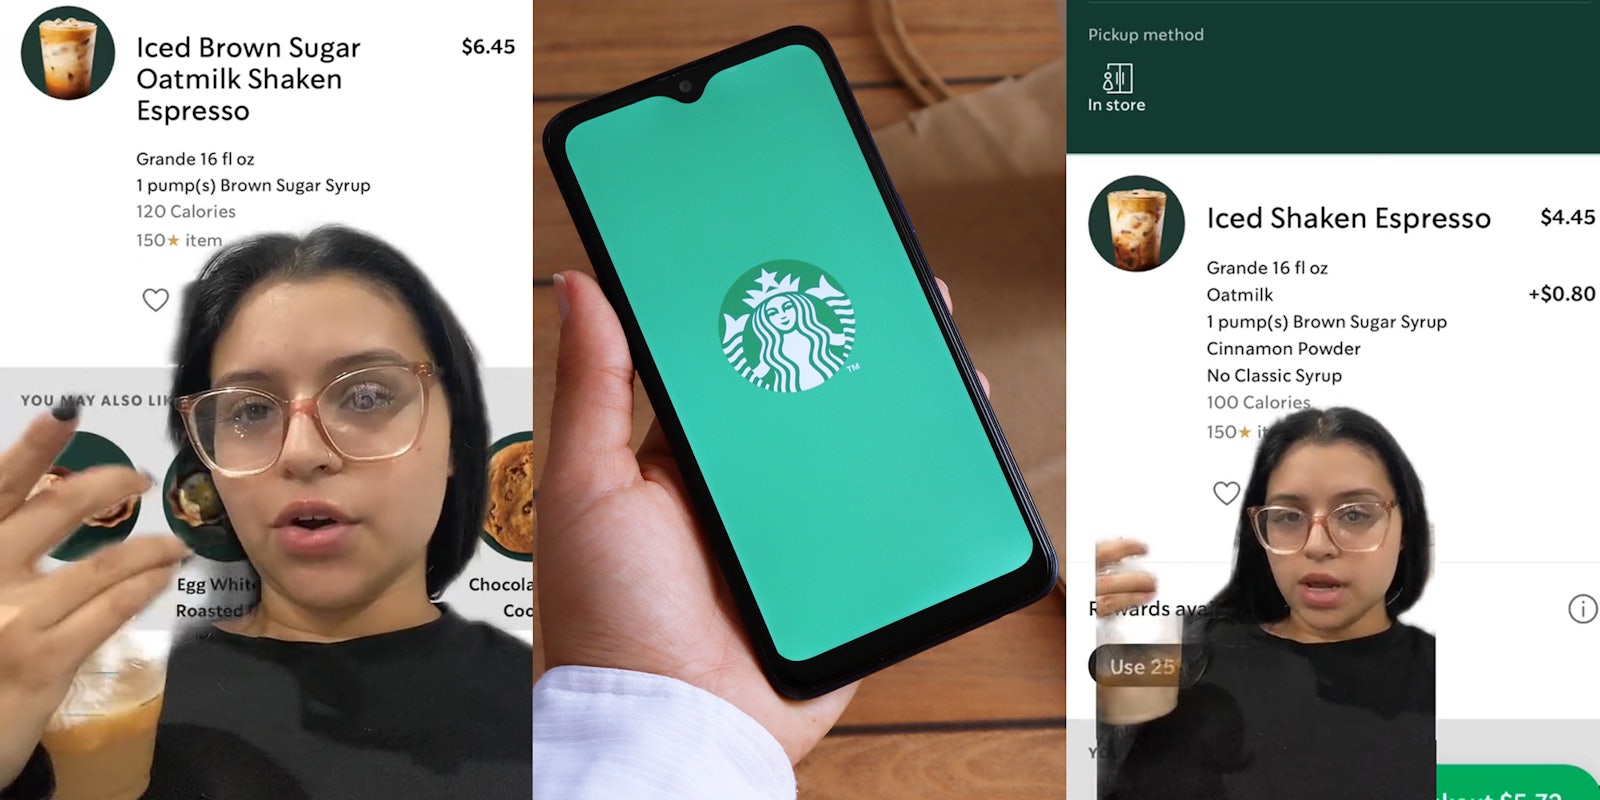 Woman greenscreen TikTok over Starbucks ordering on app 'Iced Brown Sugar Oatmilk Shaken Espresso' for $6.45 (l) hand holding phone with Starbucks app on screen in front of wooden background (c) woman greenscreen TikTok over Starbucks ordering in app 'Iced Shaken Espresso' for $4.45 (+$0.80) (r)